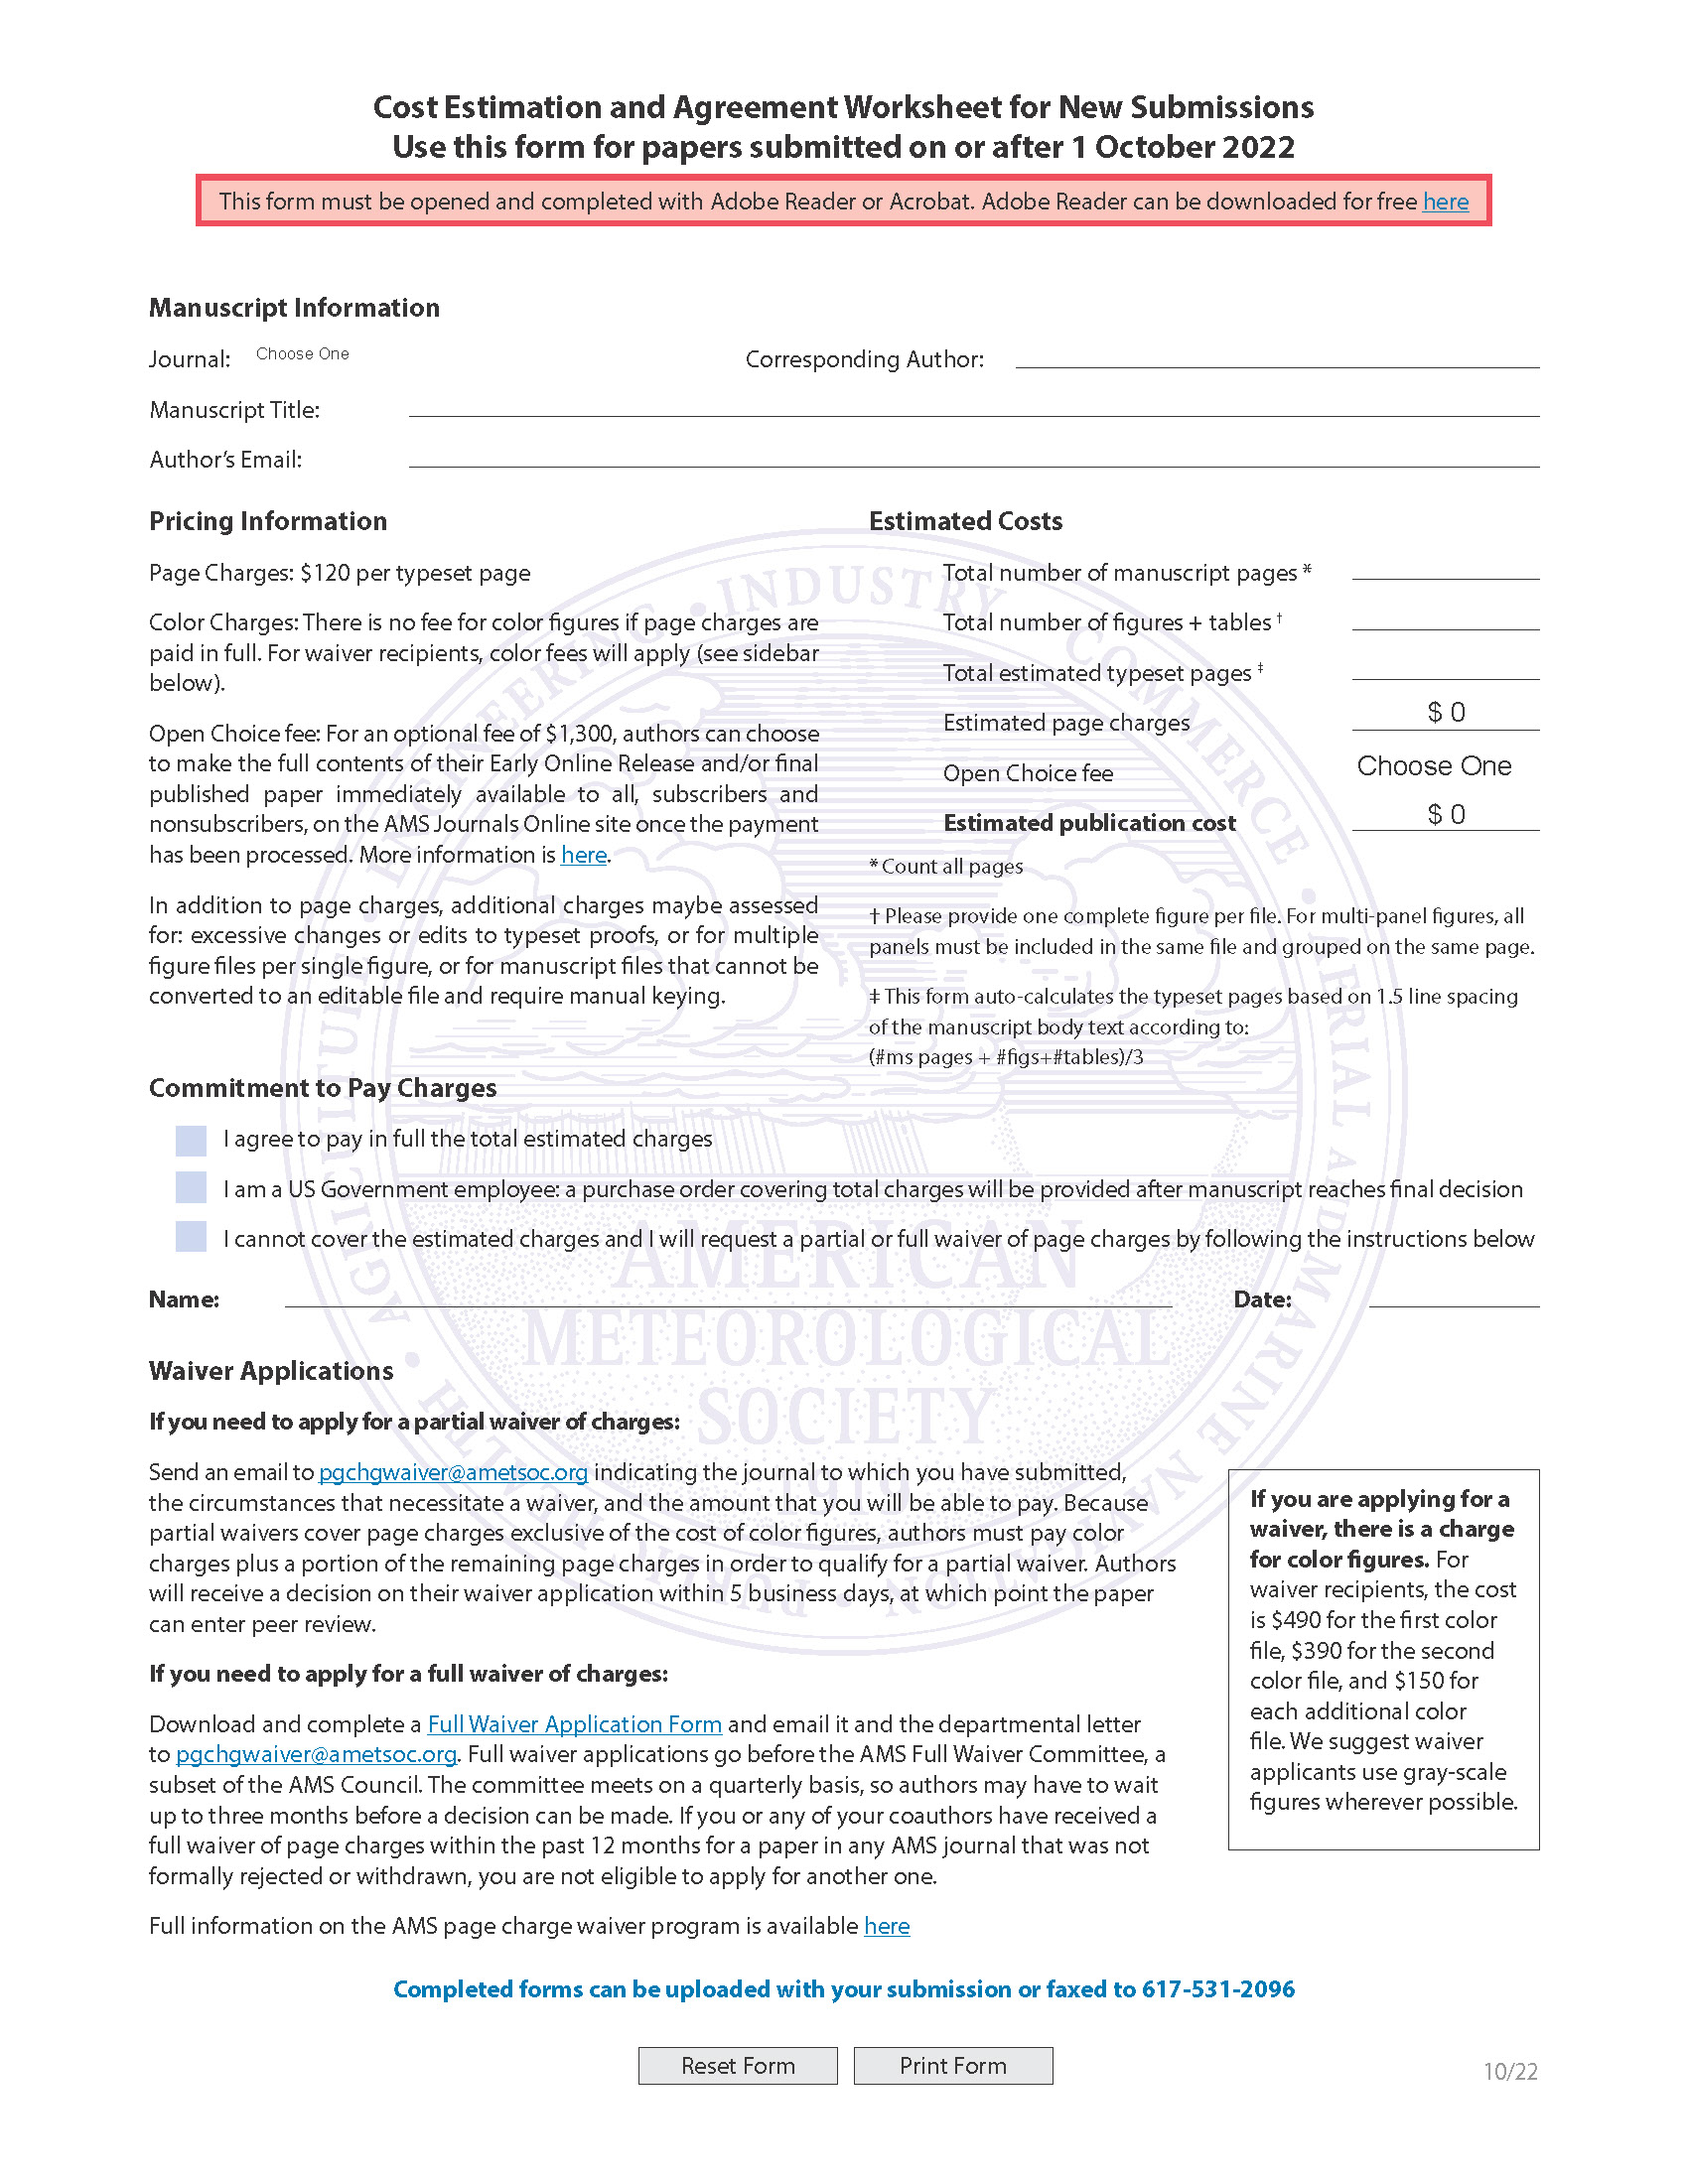 Download the New Submission Format Cost Estimation and Agreement Worksheet as a PDF